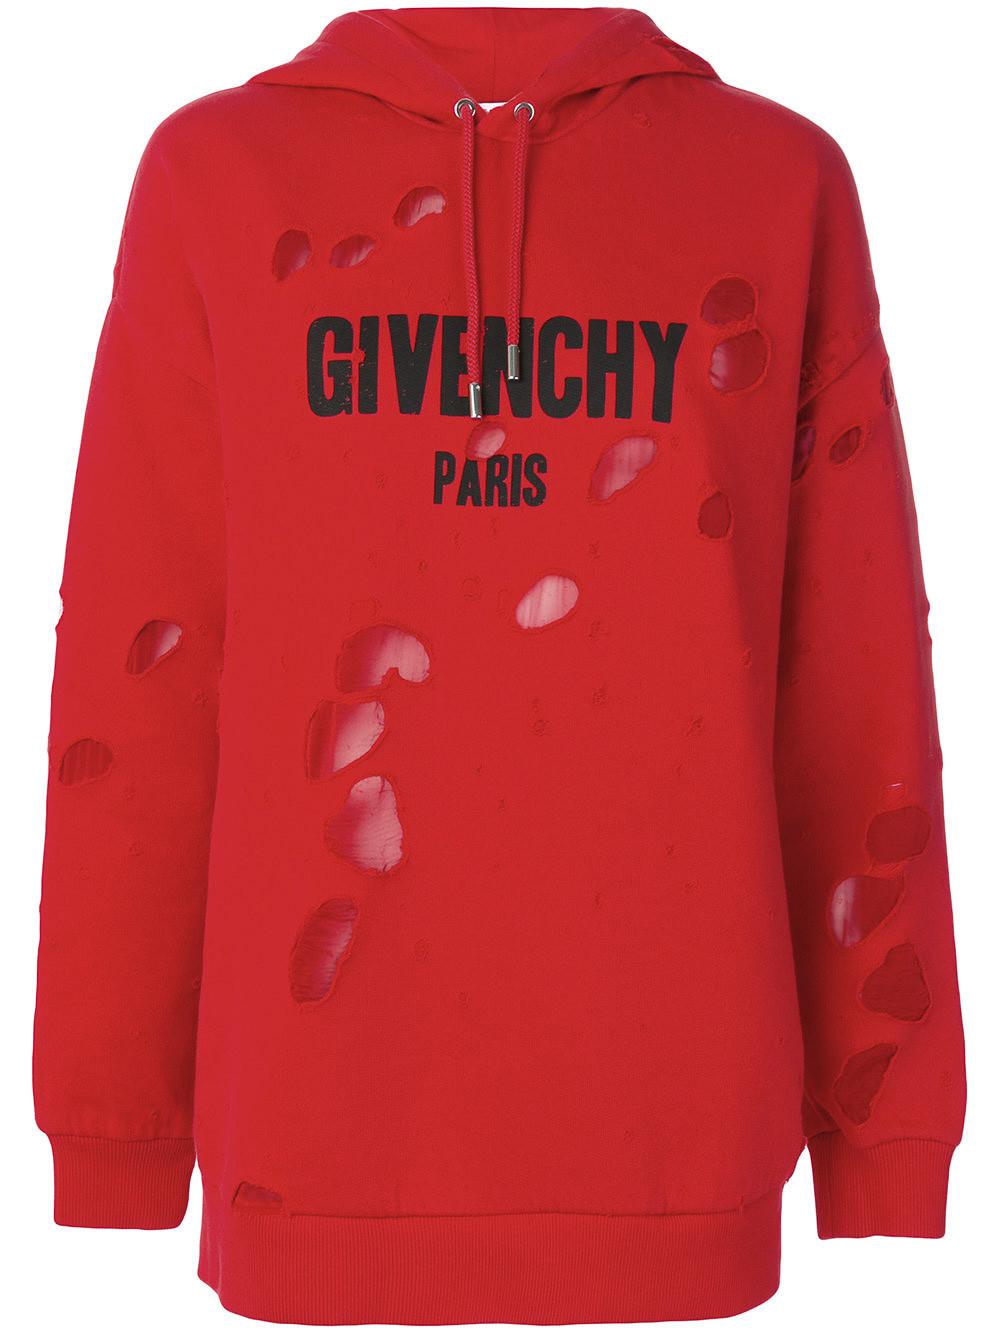 givenchy paris destroyed hoodie price